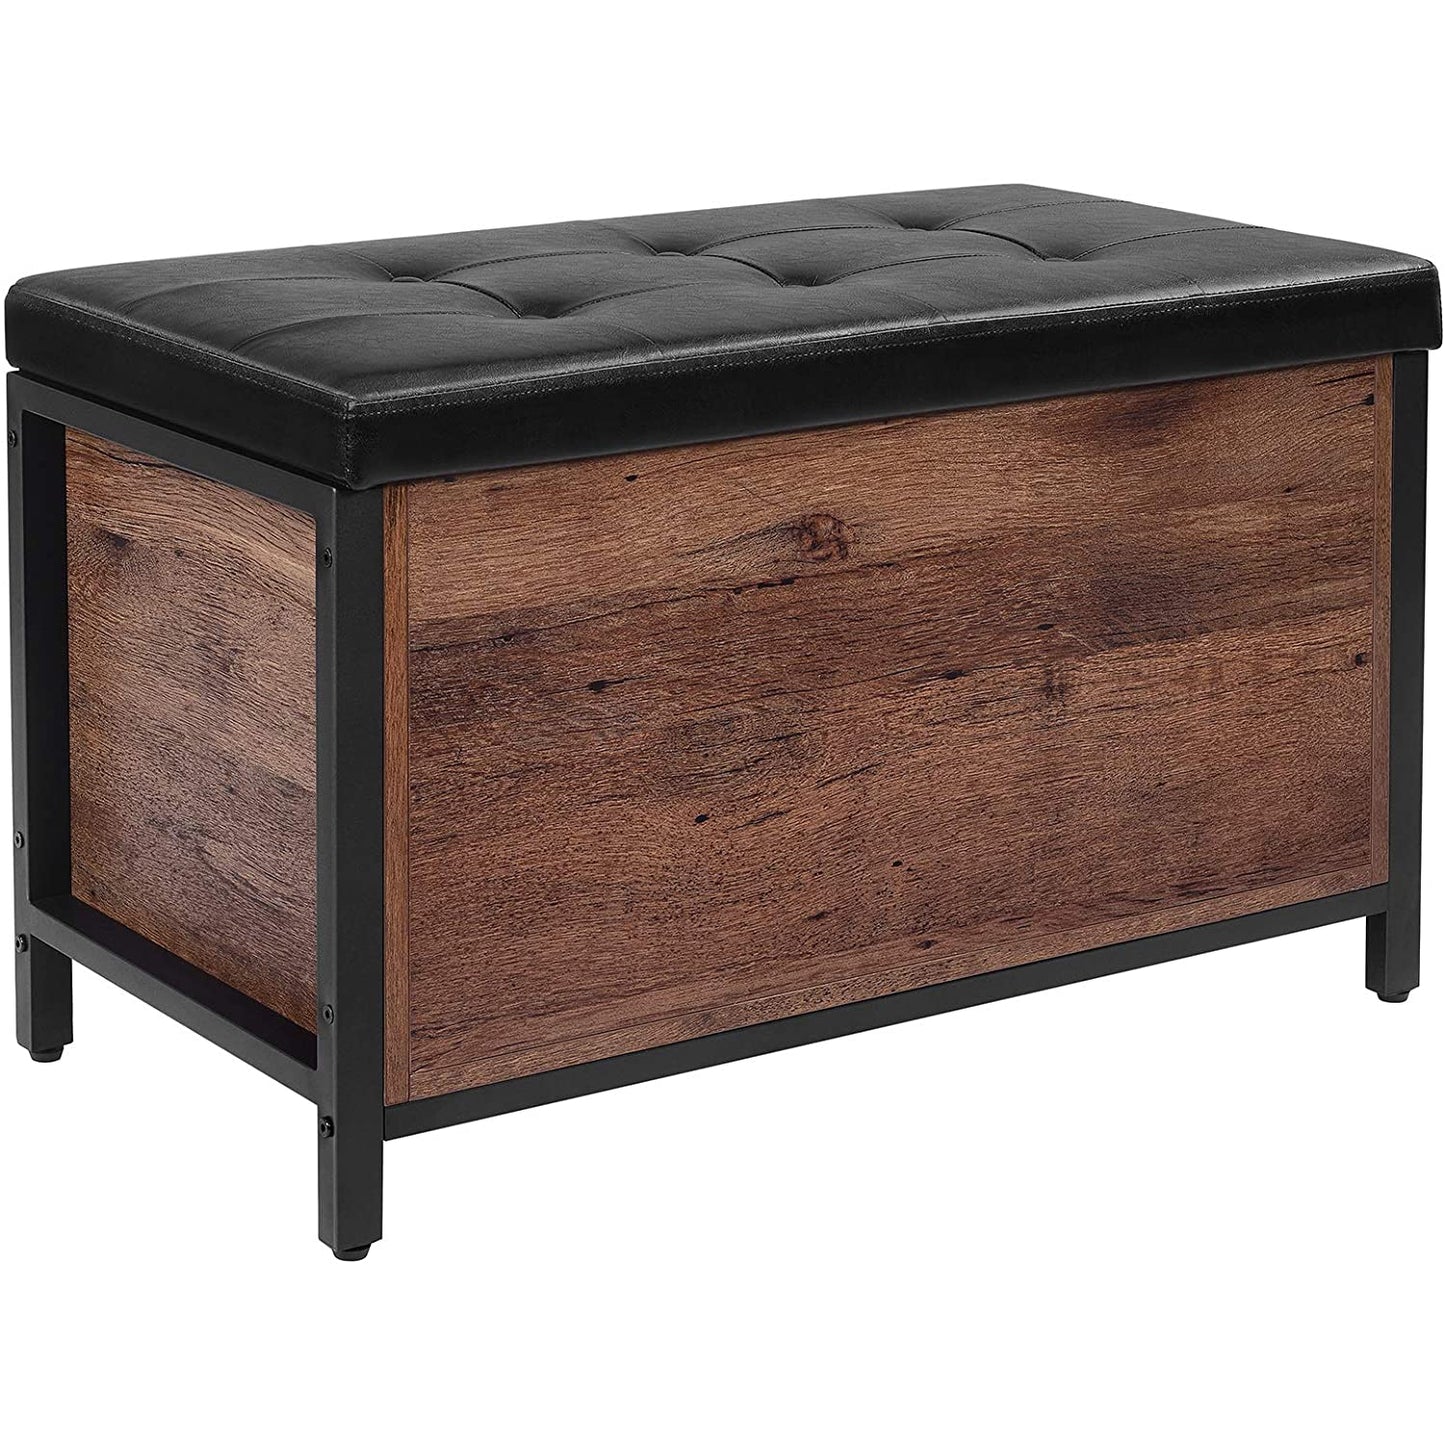 Nancy's Lorain Vintage Footstool - Sofa with storage space - Industrial Footstools - Black artificial leather - 80 x 40 x 50 cm